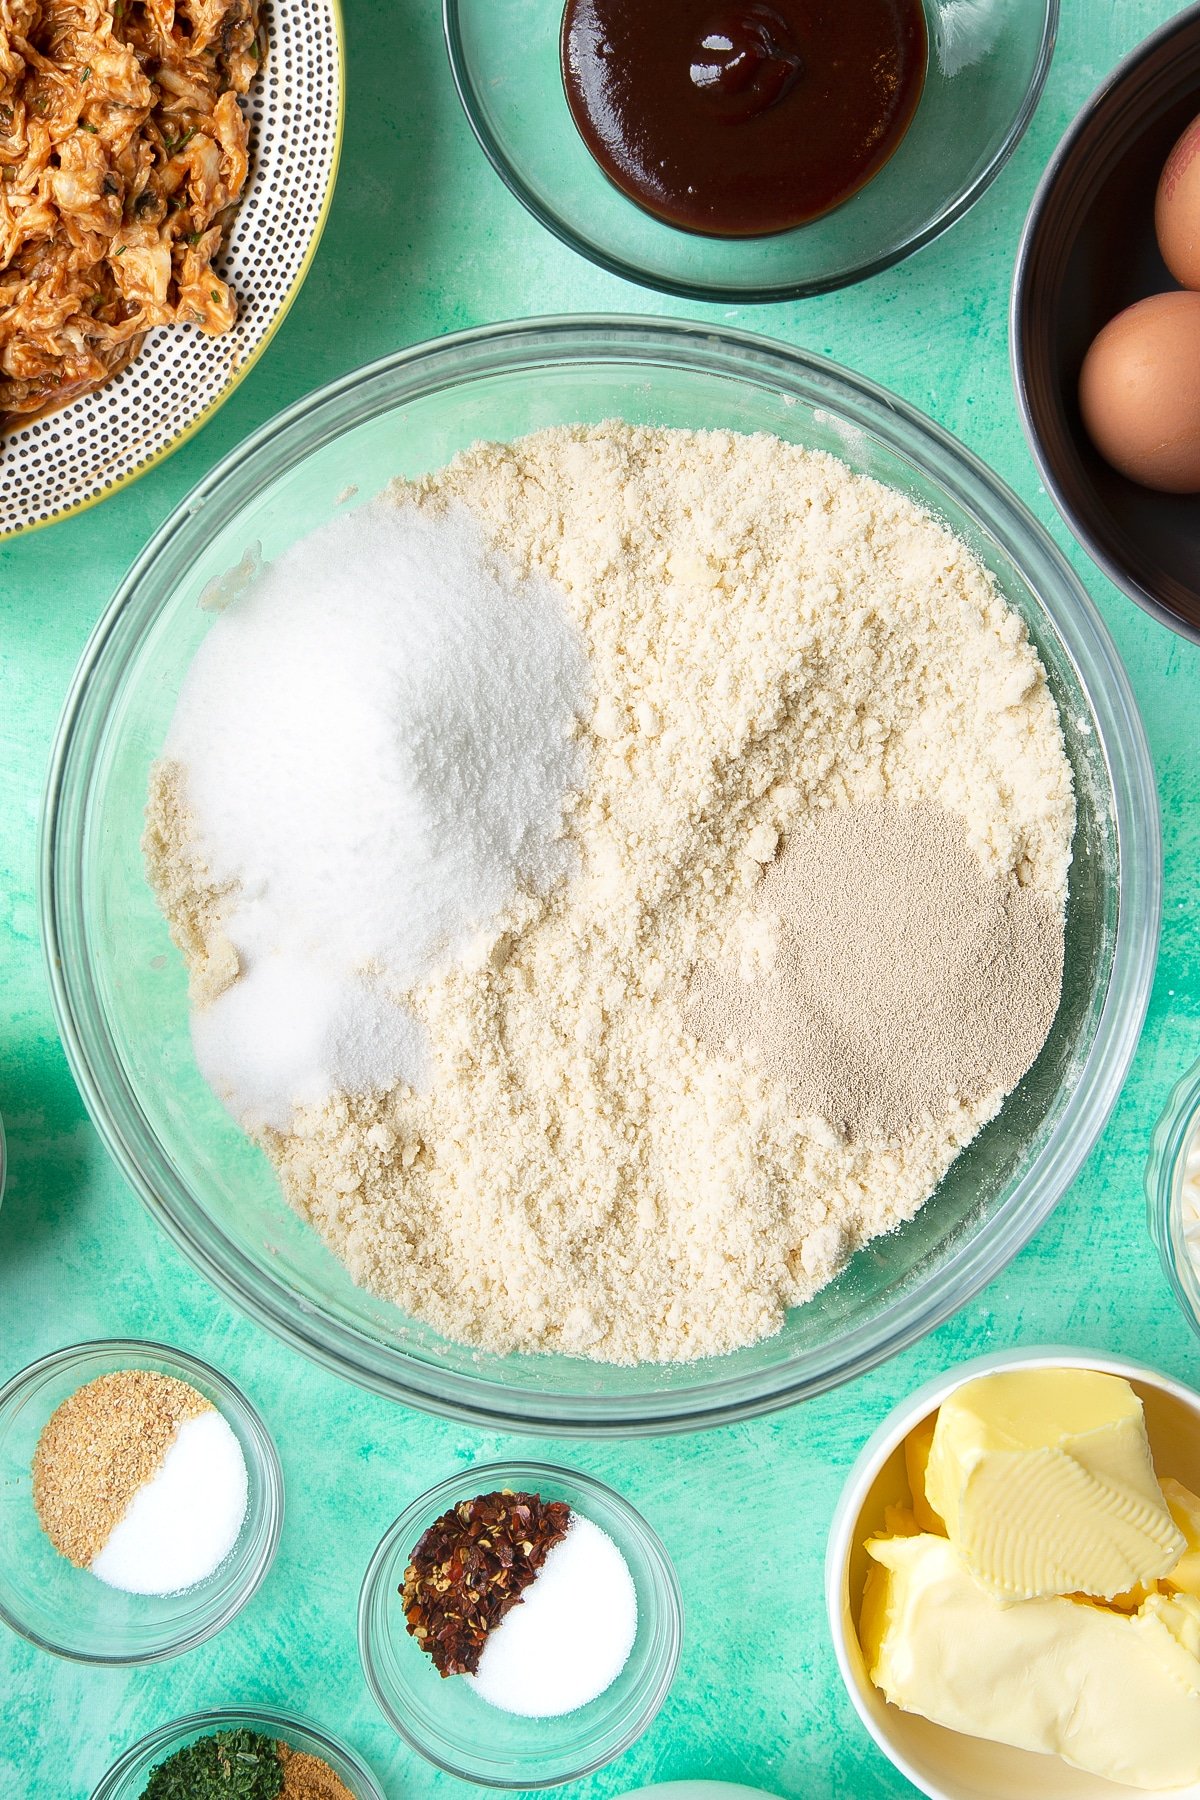 Flour and butter rubbed together in a glass mixing bowl and topped with salt, sugar and yeast. Ingredients to make chicken doughnuts surround the bowl.